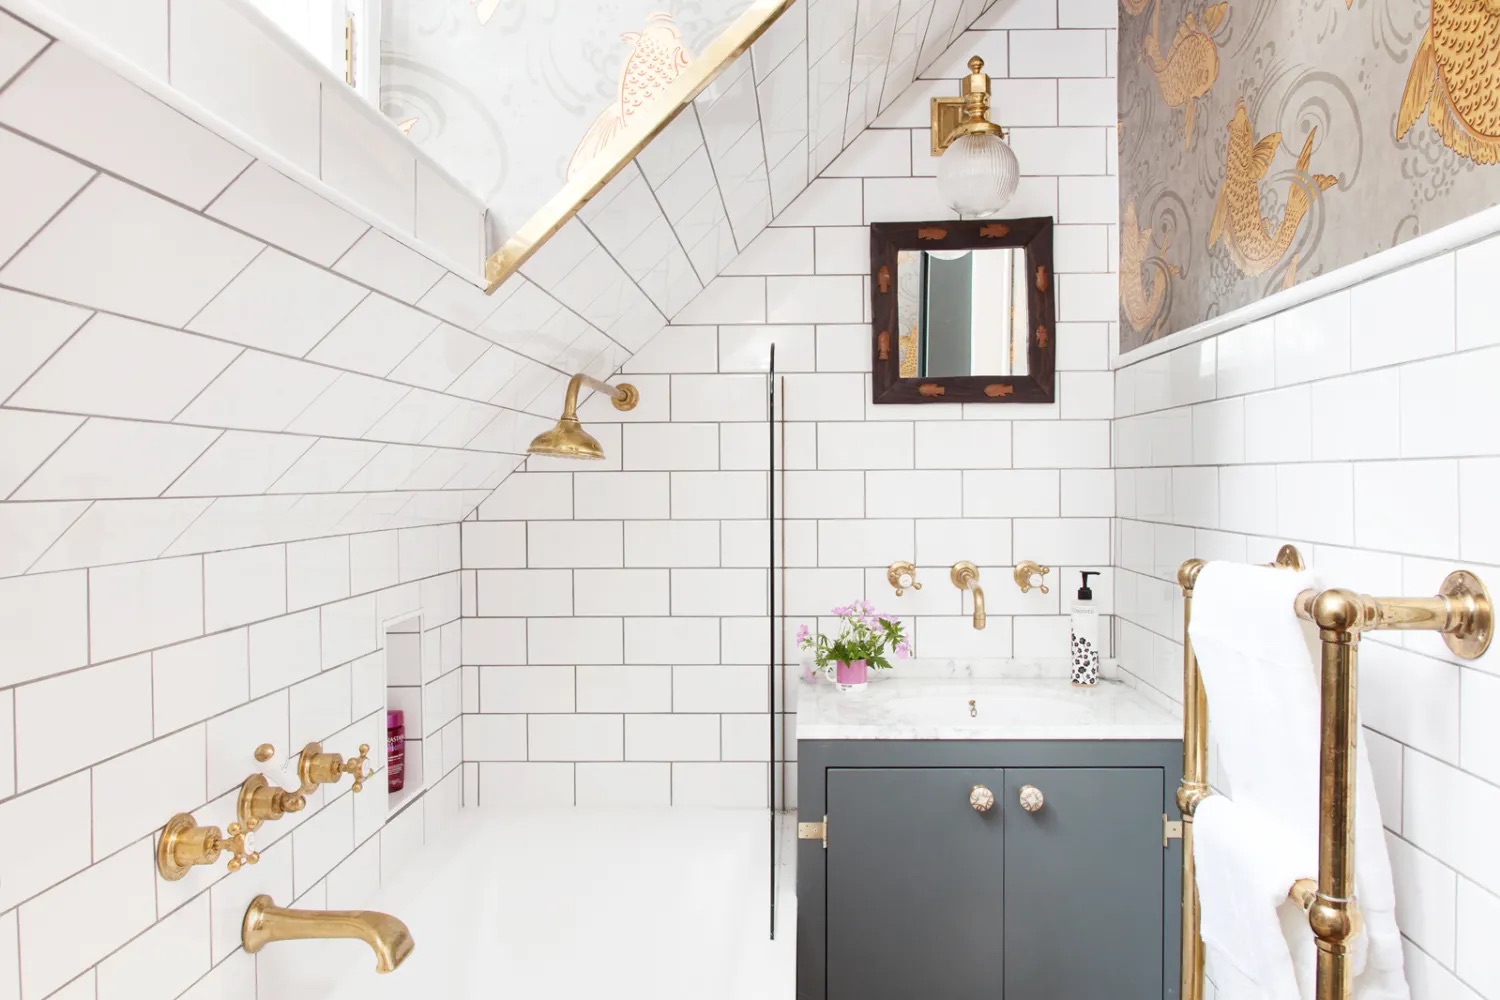 Bathroom Dressing Rooms: 10 Ideas For A Multi-Purpose Space